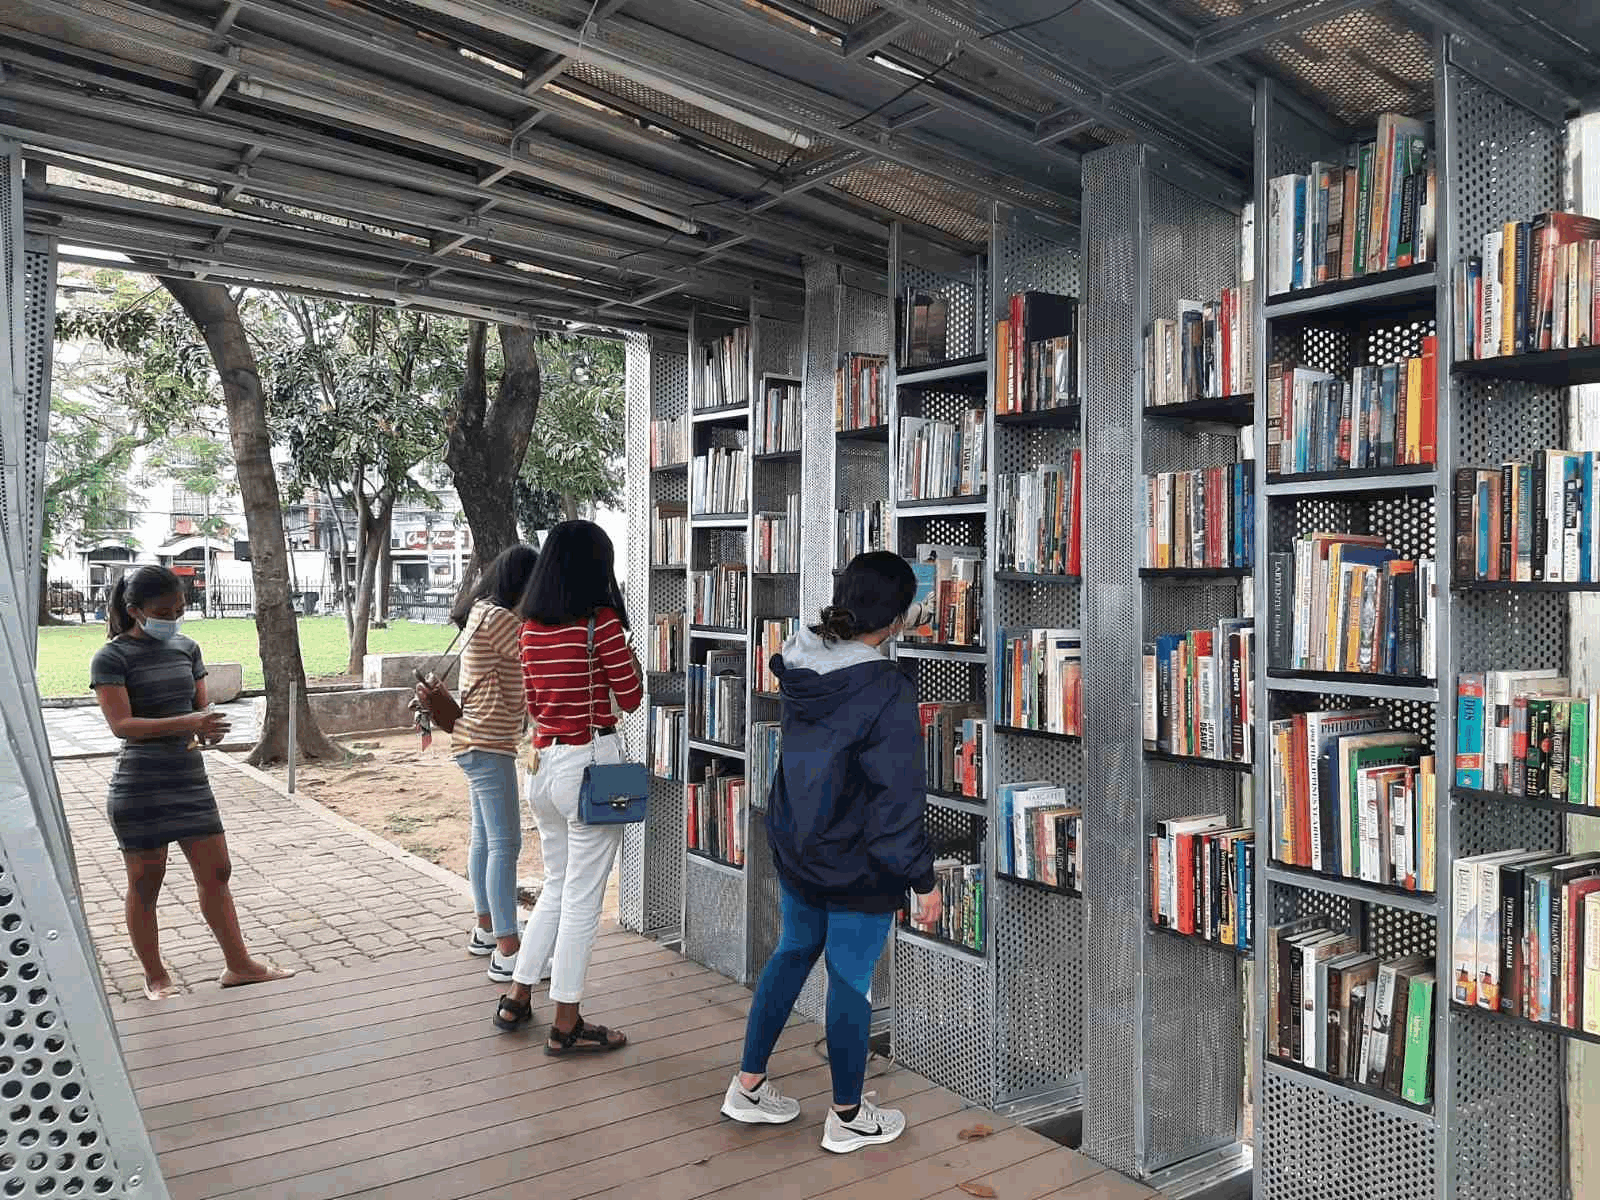 Intramuros reopens - The Book Stop Project 